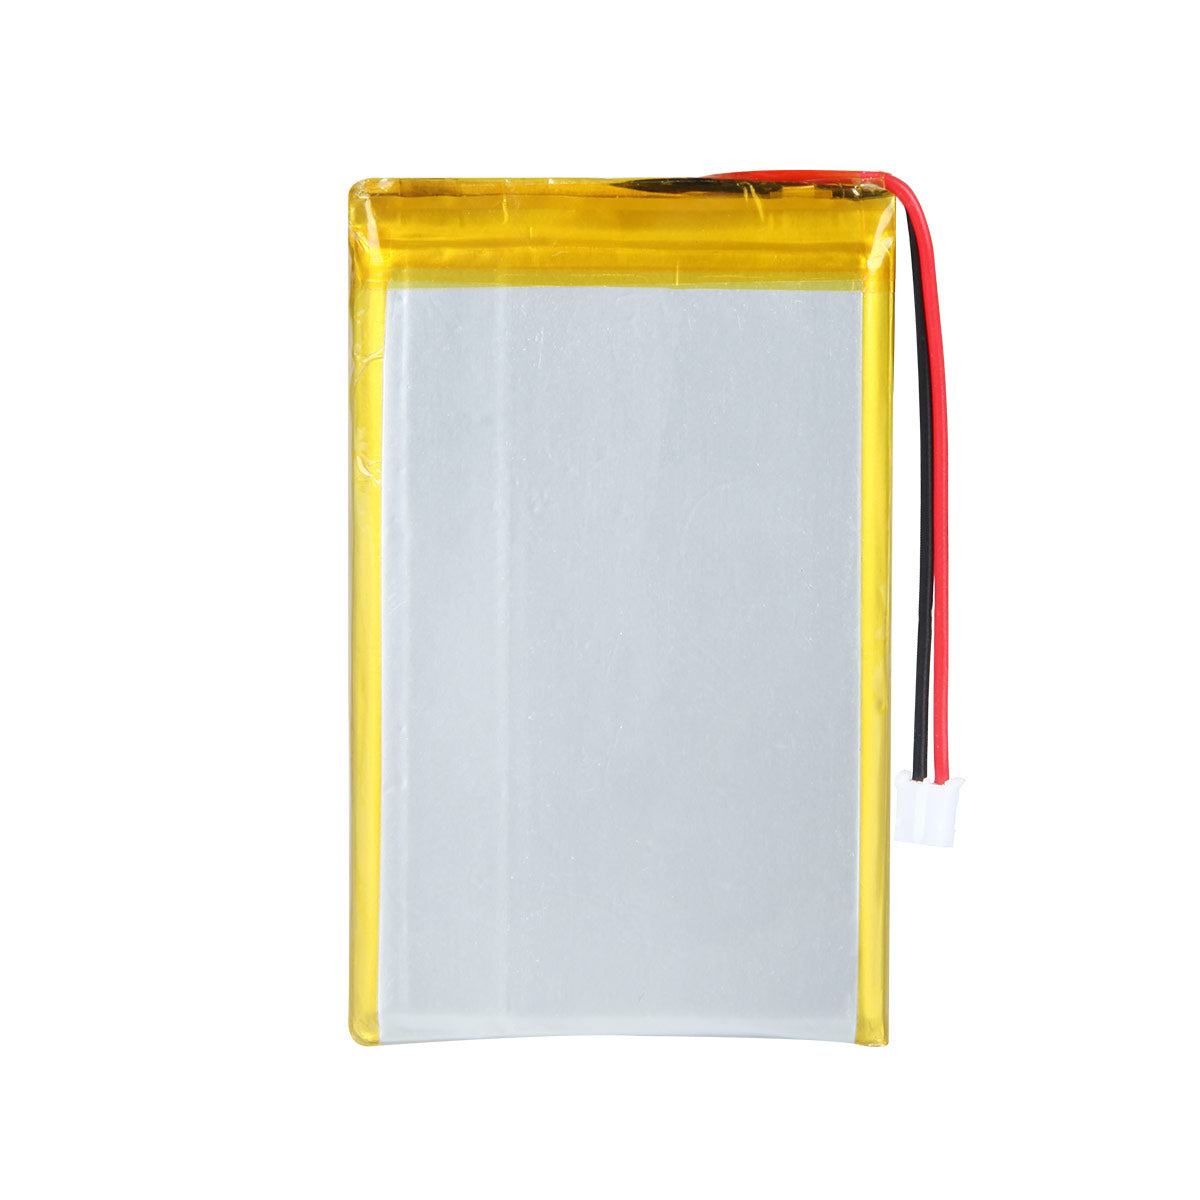 3.7V 2000mAh 525085 Lithium Polymer Ion Rechargeable Li-Po Battery